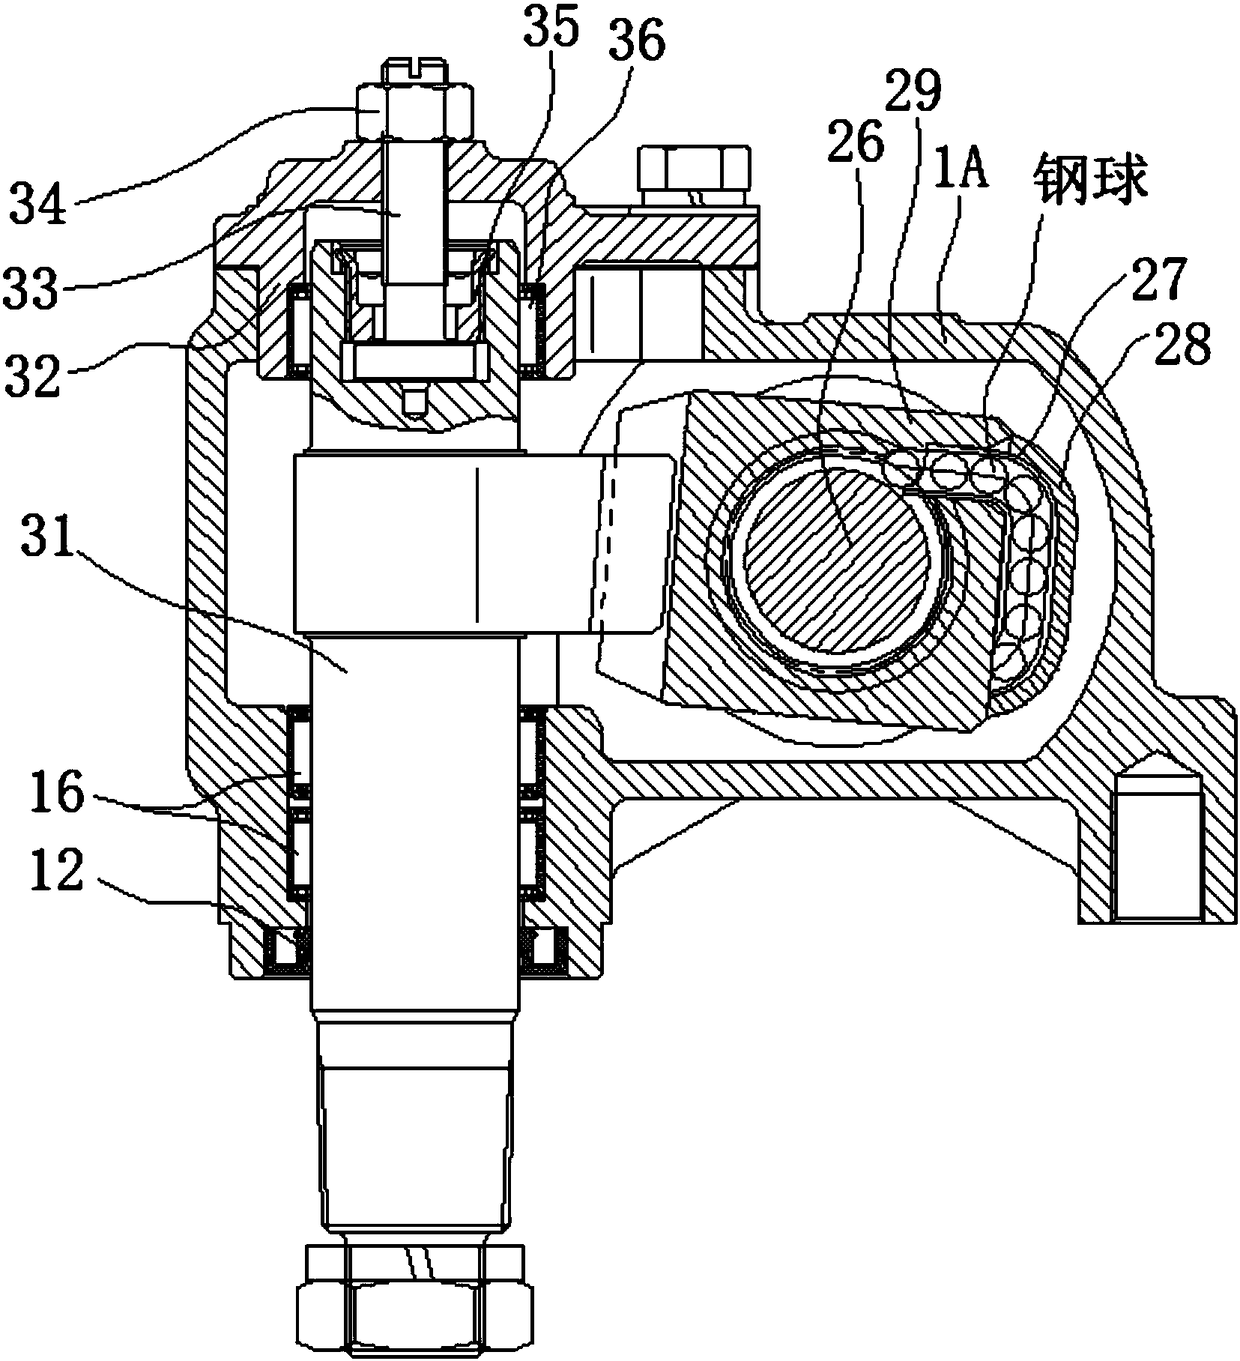 A heavy-duty recirculating ball dual-mode electric power steering device